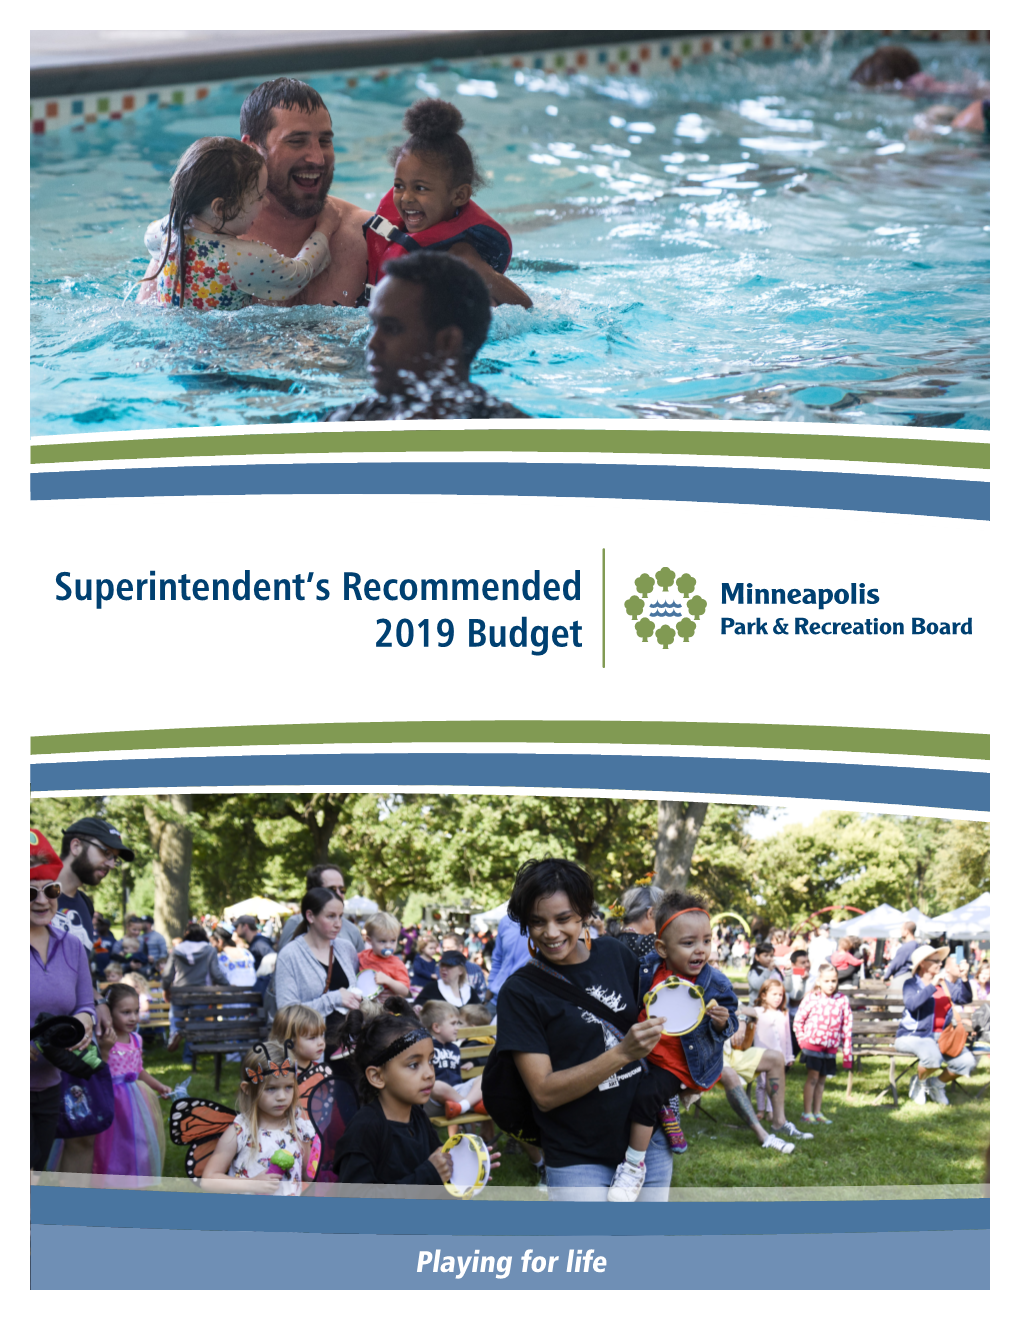 2019 Recommended Budget for the Minneapolis Park and Recreation